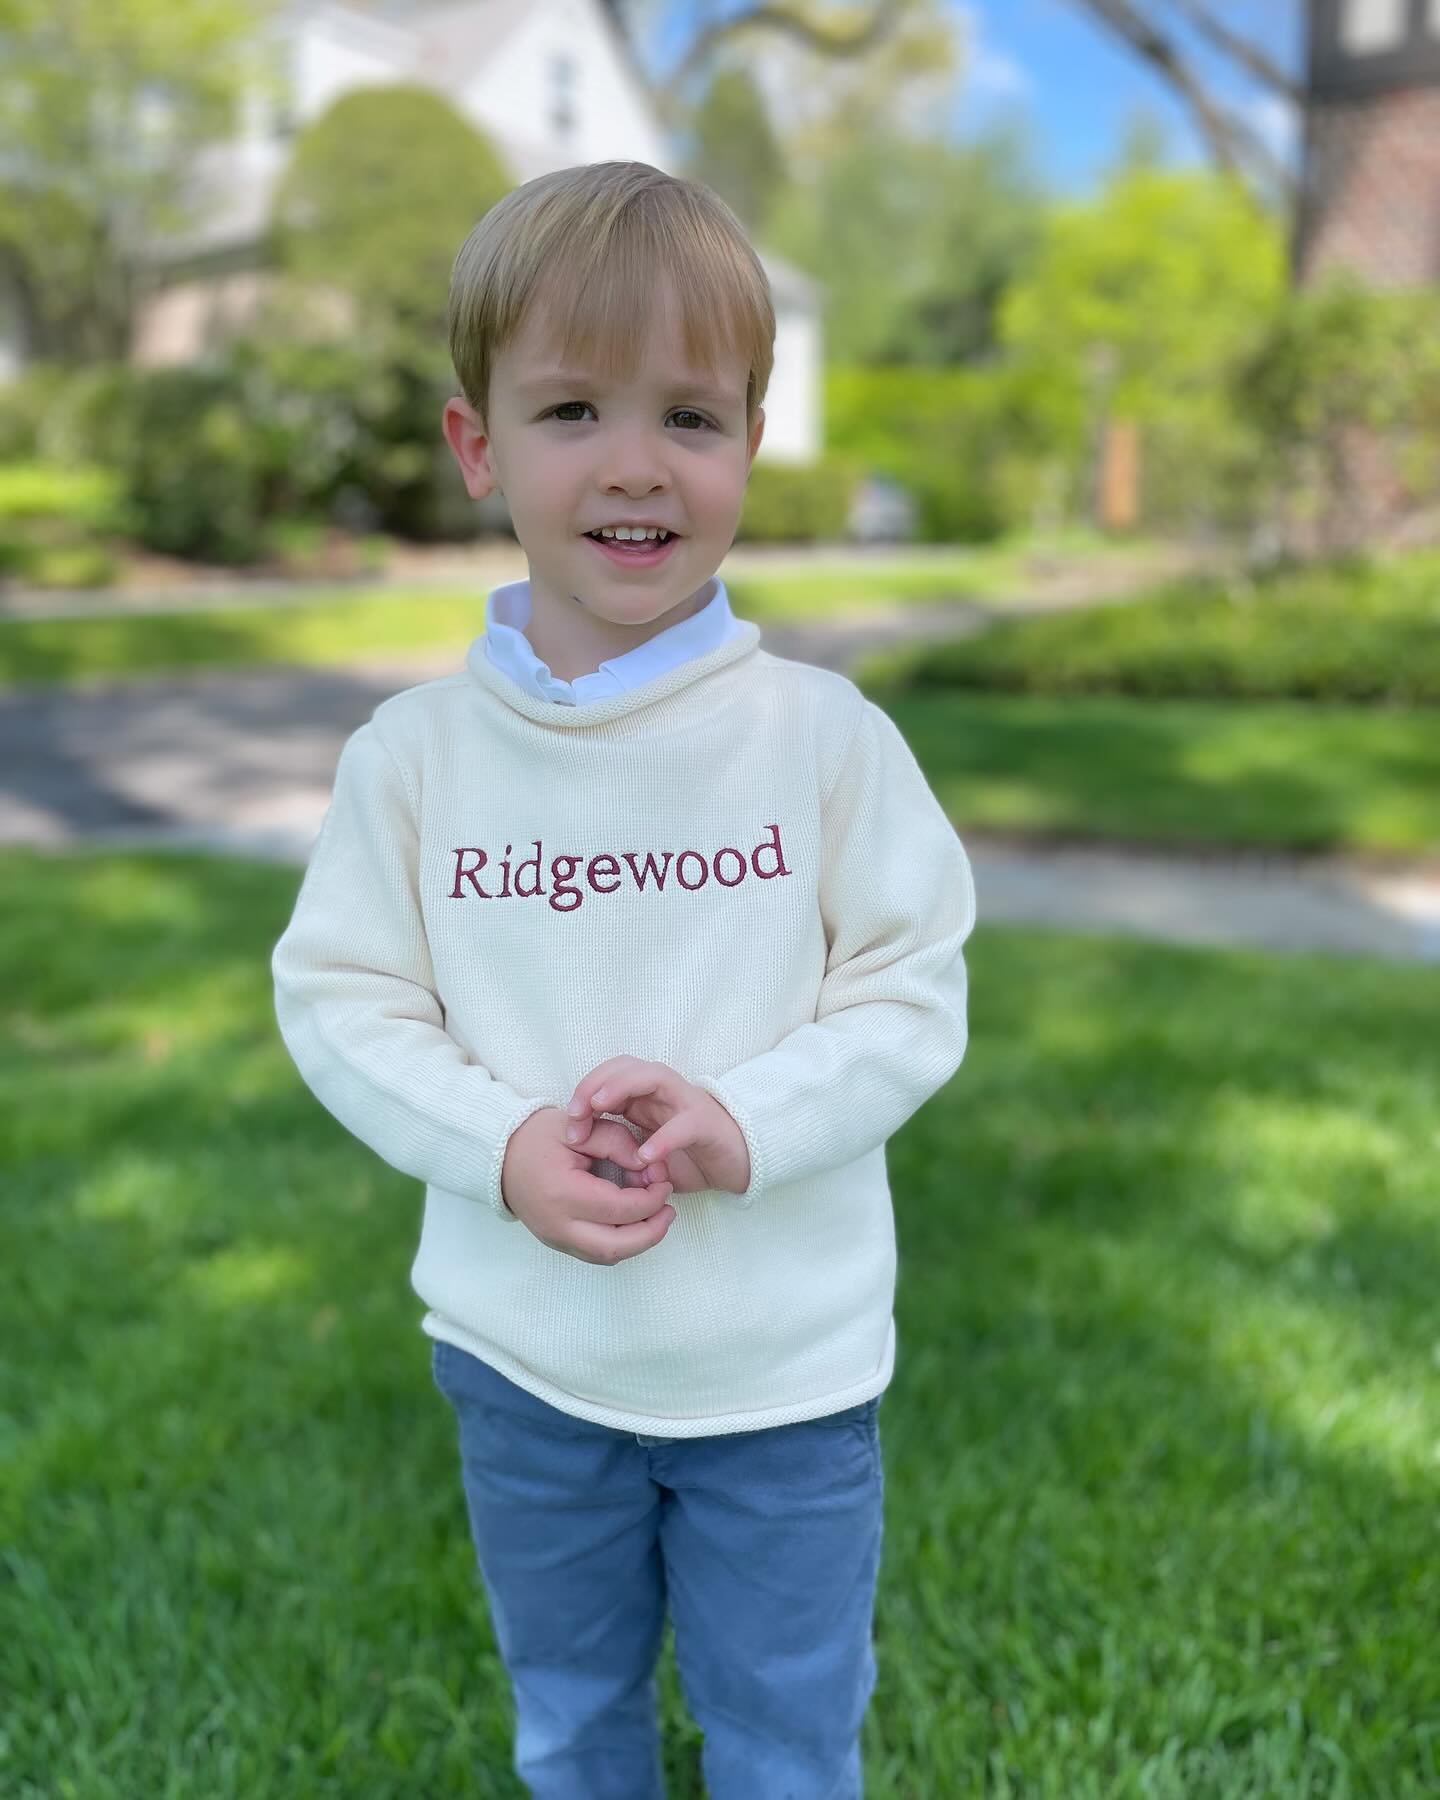 I feel so lucky to live in this amazing town and be a part of this incredible community!! What better way to show your Ridgewood pride than with this adorable sweater?! 🤩